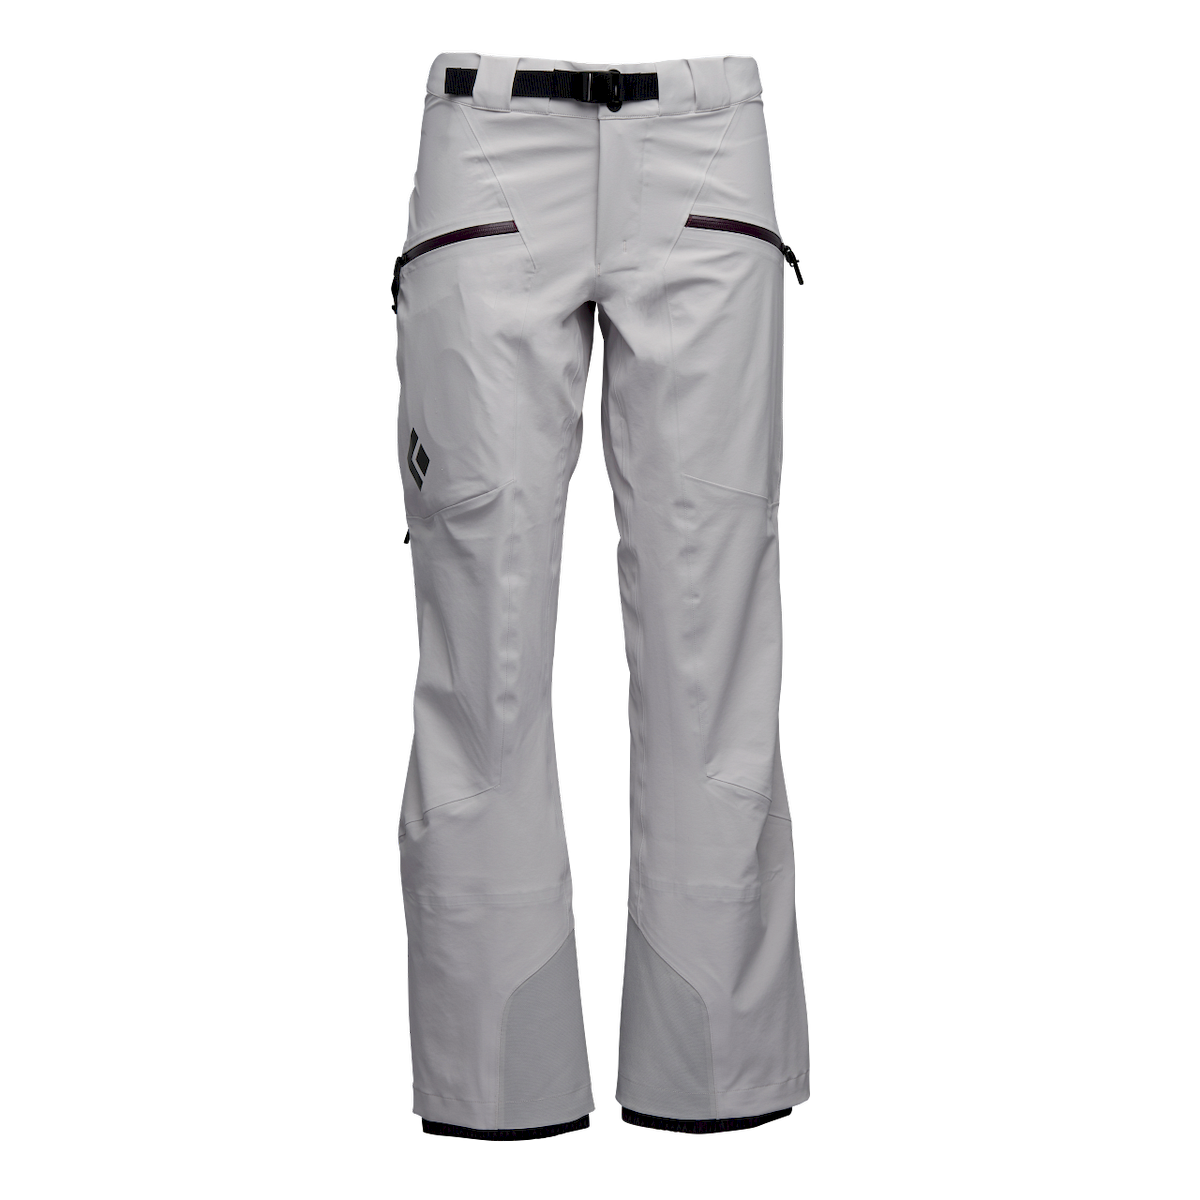 Buy Dare 2b x Next Glaciation Salopette Ski Trousers from the Next UK  online shop